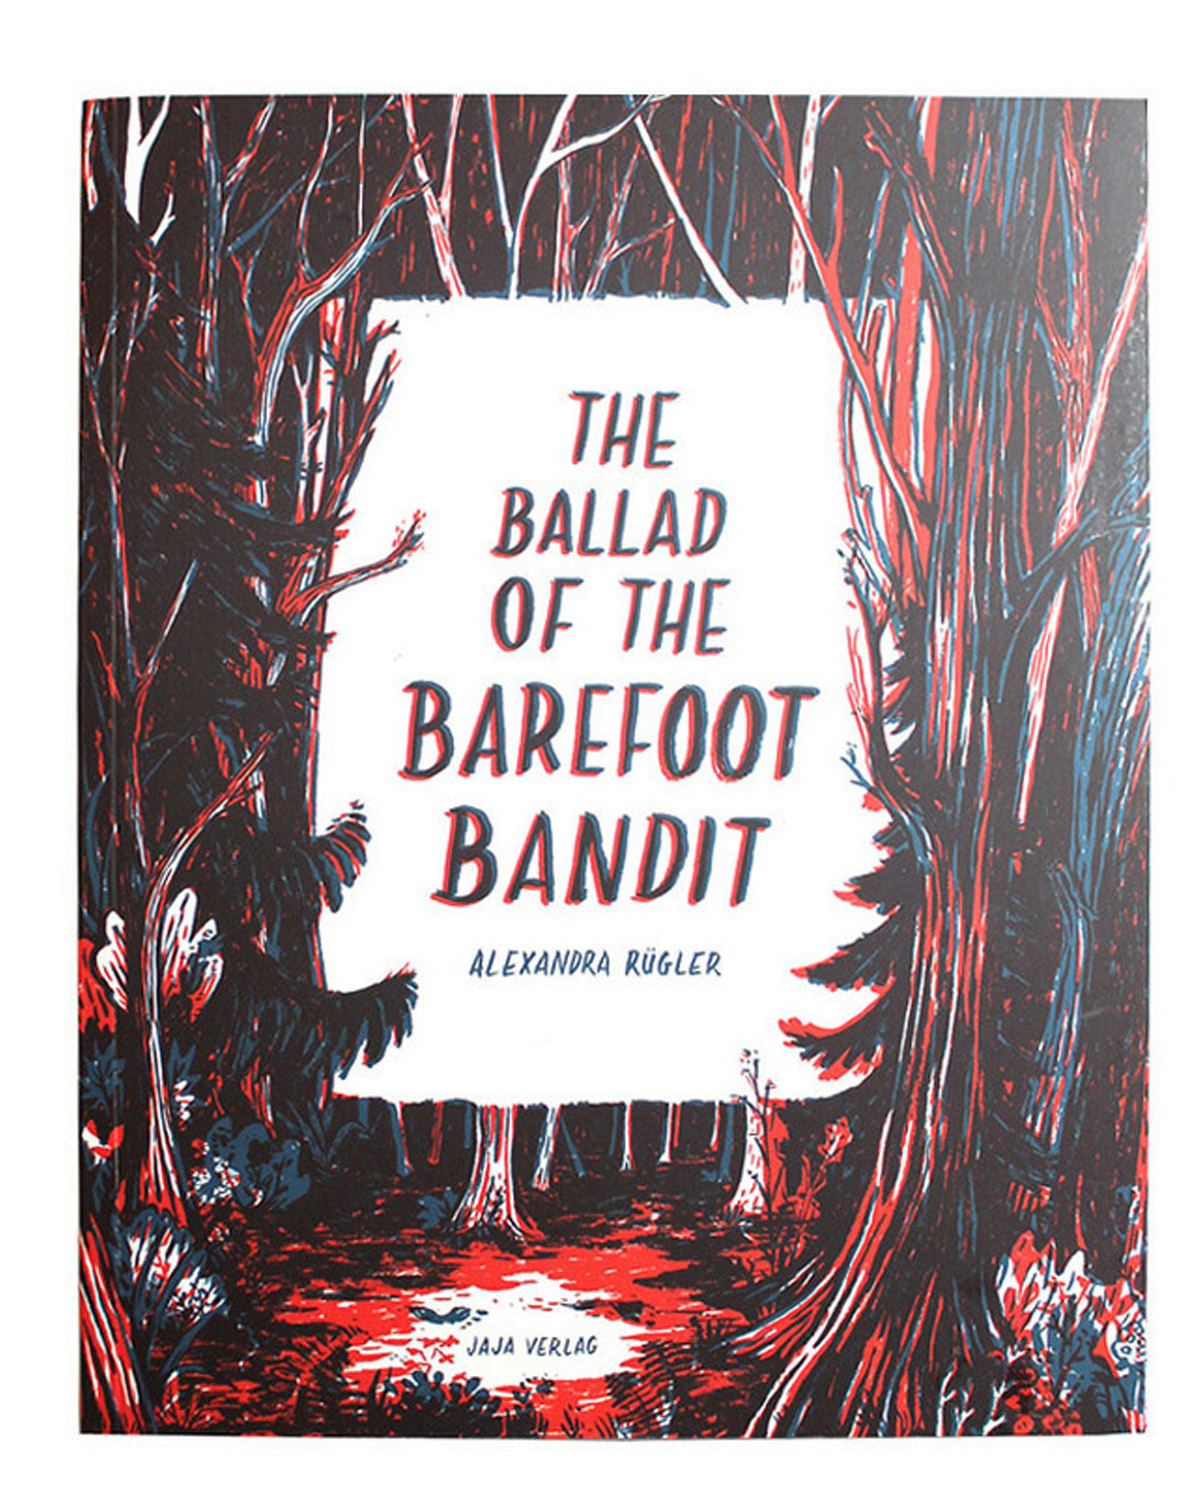 The Ballad of the Barefoot Bandit